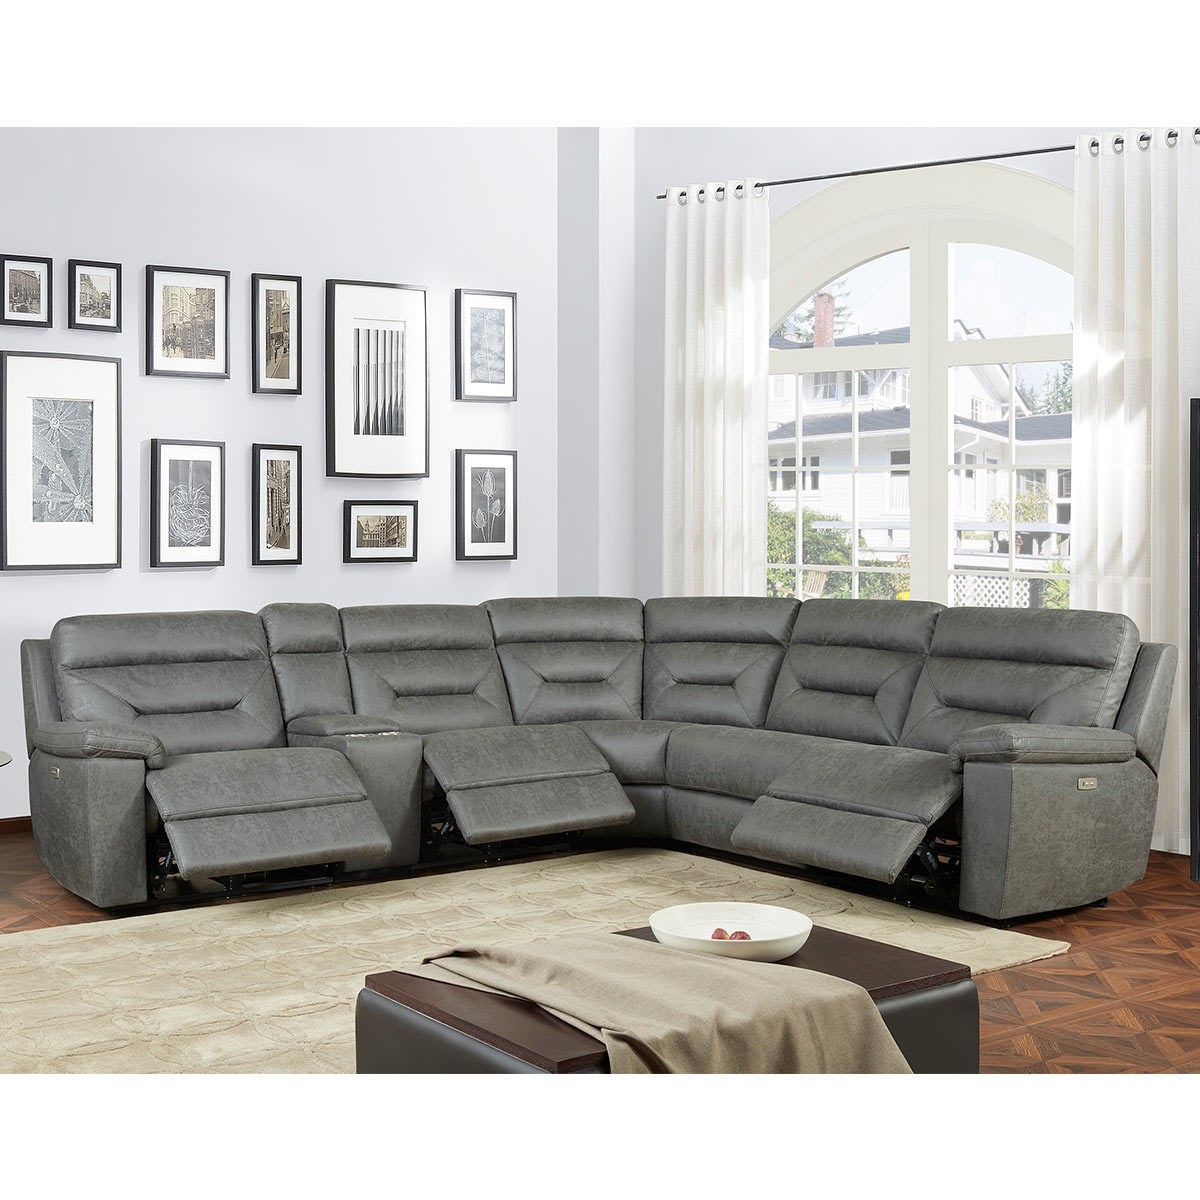 Gilman Creek Justin Grey Fabric Power, Grey Fabric Sectional Sofa With Recliner And Chaise Lounge